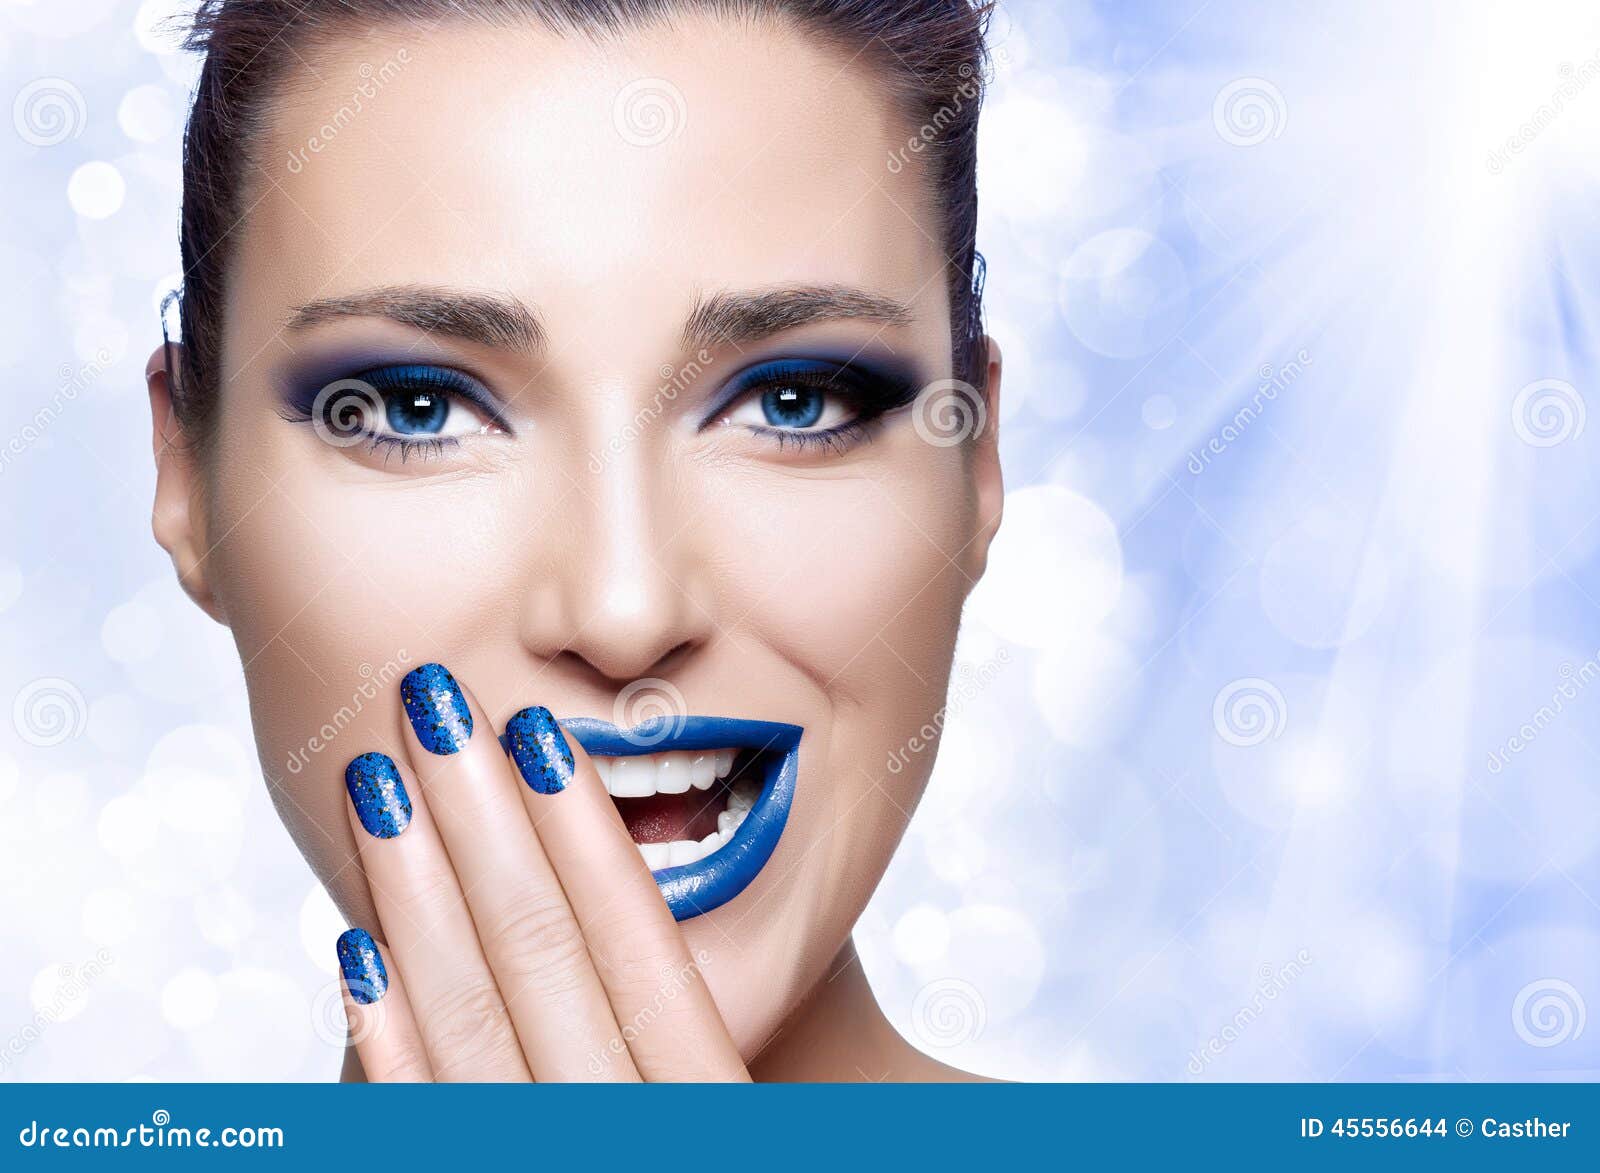 Beautiful Girl in Blue with Hand on Her Face. Nail Art and Makeu - beautiful-girl-blue-hand-her-face-nail-art-makeu-trendy-winter-makeup-young-woman-laughing-covering-half-mouth-45556644